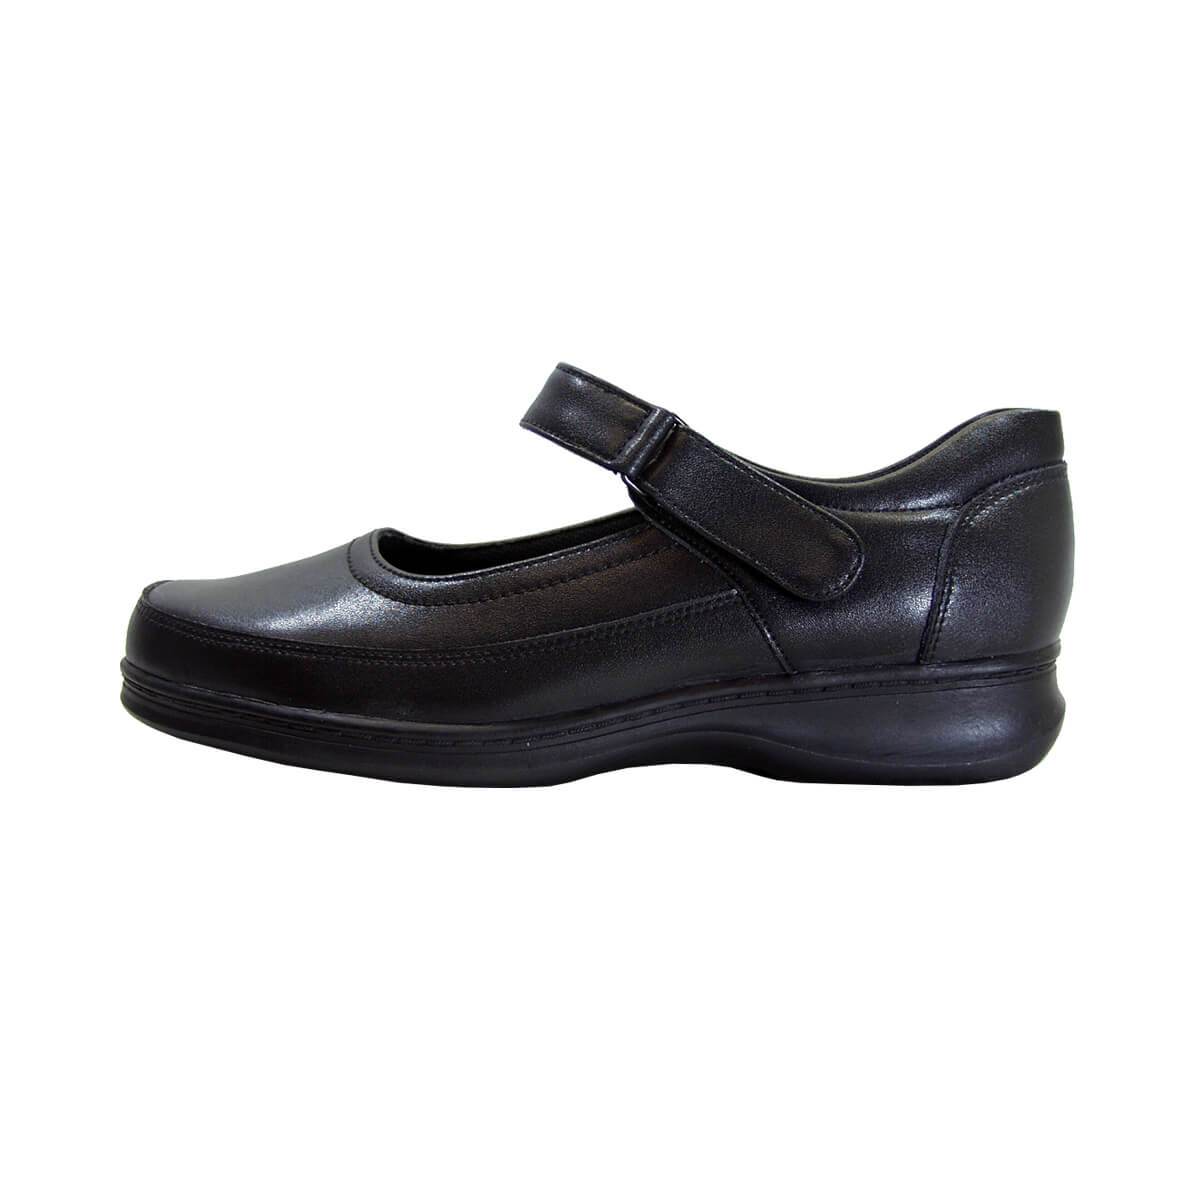 24 HOUR COMFORT Kimmy Women's Wide Width Mary Jane Leather Shoes